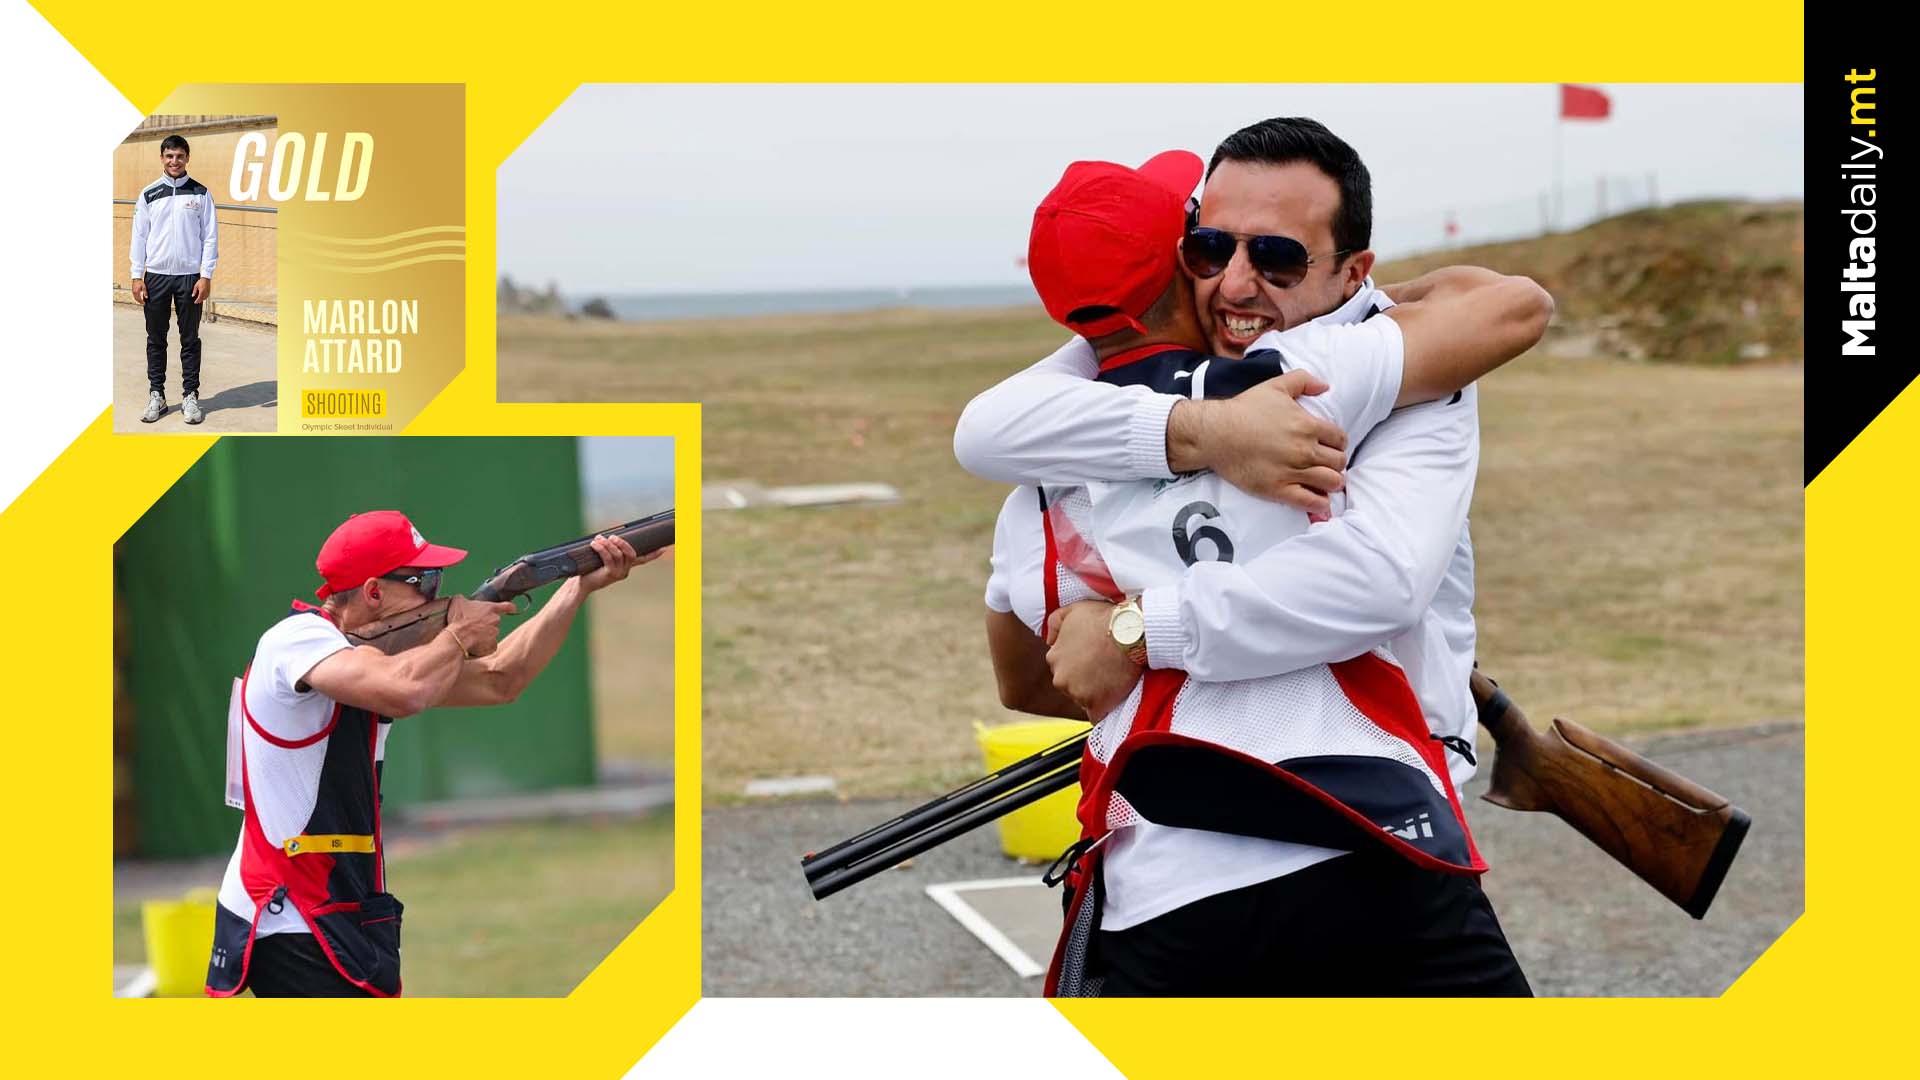 Gold Medal For Gozo In Shooting At Guernsey